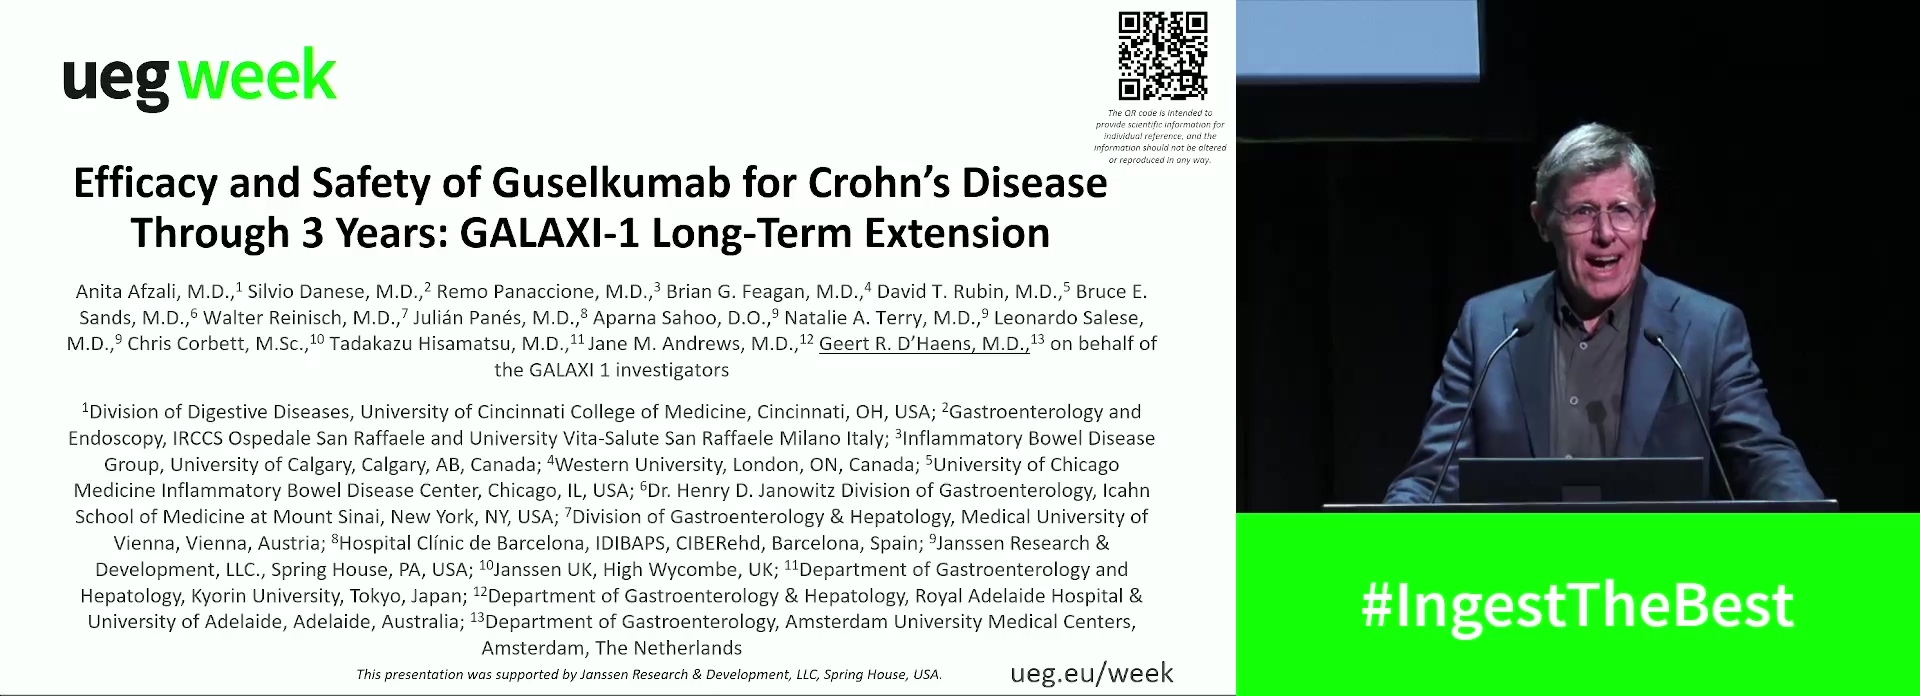 EFFICACY AND SAFETY OF GUSELKUMAB FOR CROHN’S DISEASE THROUGH 3 YEARS: GALAXI-1 LONG-TERM EXTENSION